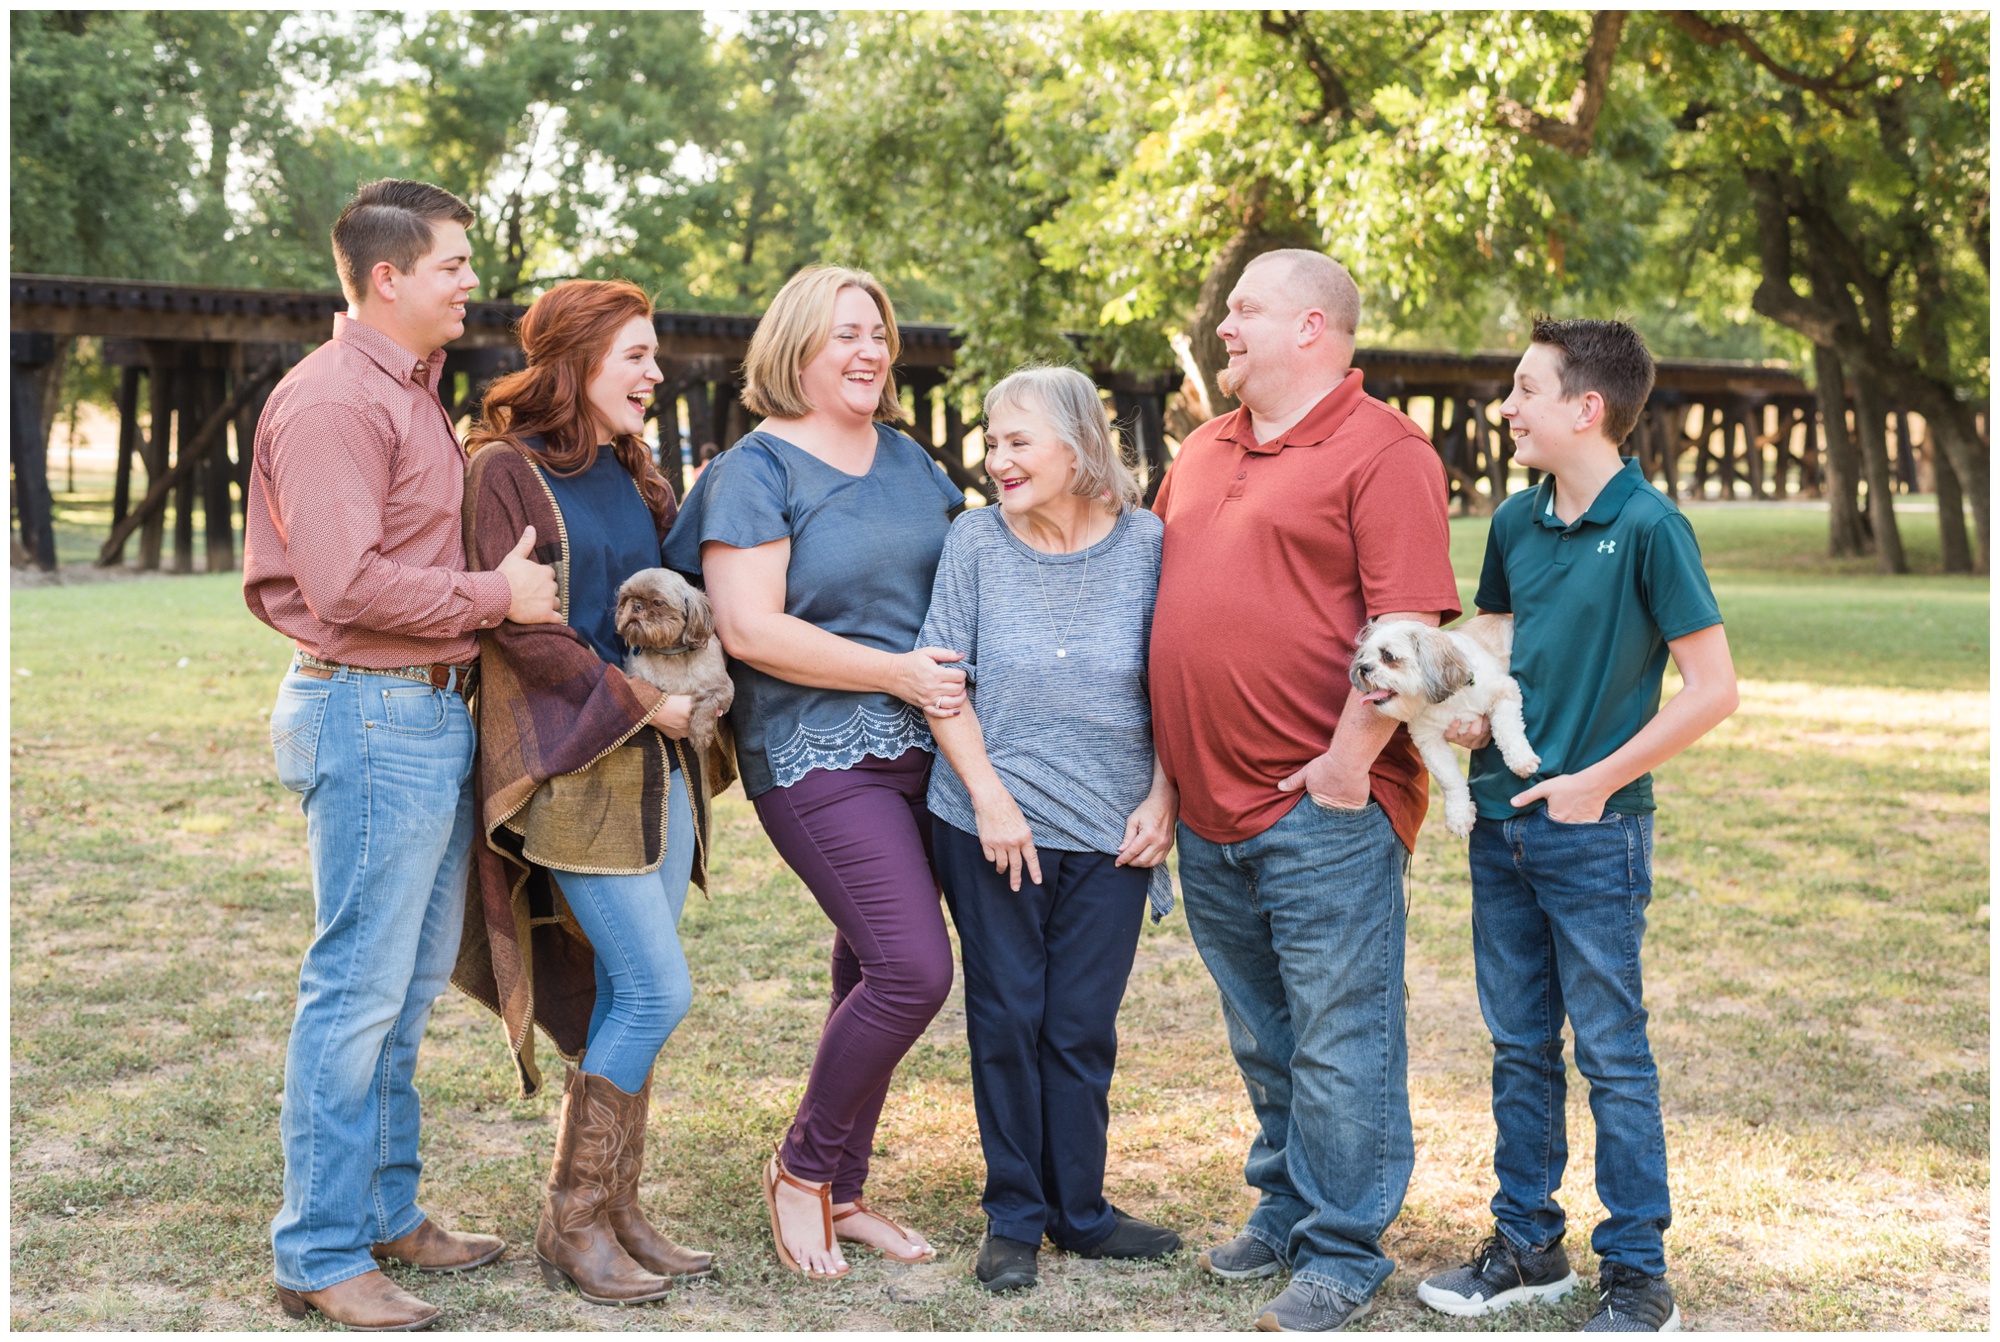 Fort Worth Trinity Park | Fort Worth Family Photographer | Fort Worth Family Session | Lauren Grimes Photography 